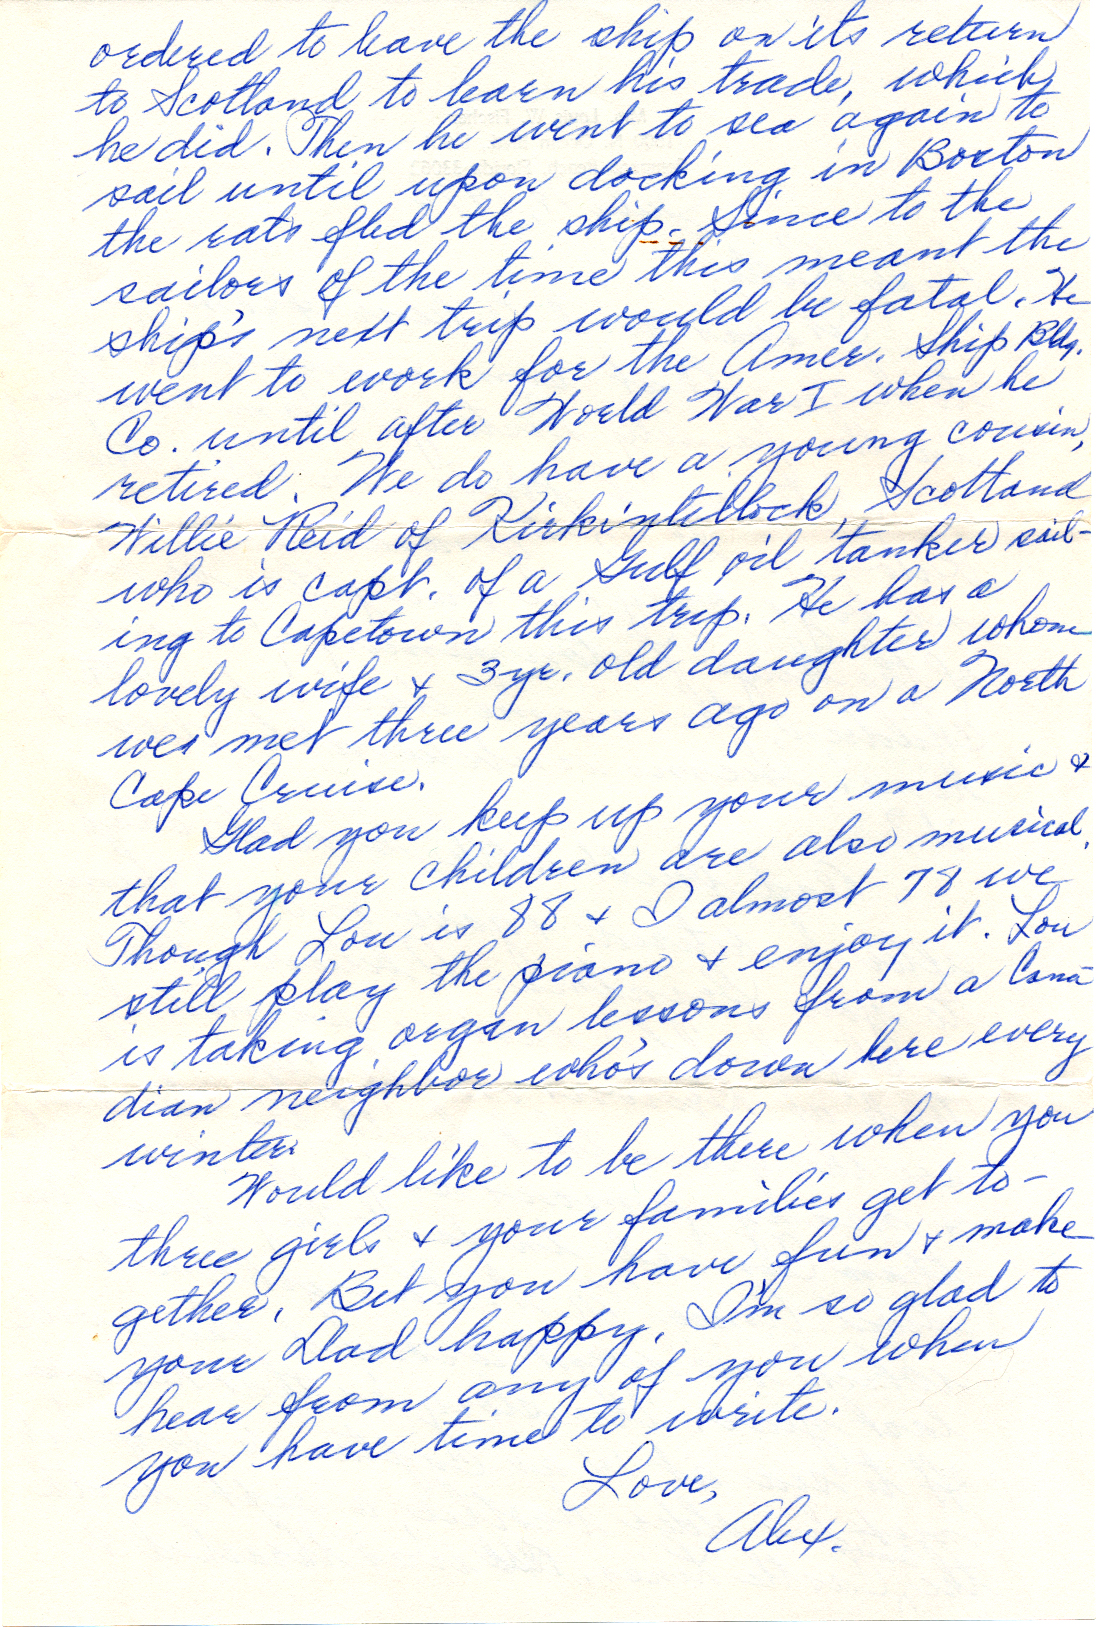 1976 letter, page 2